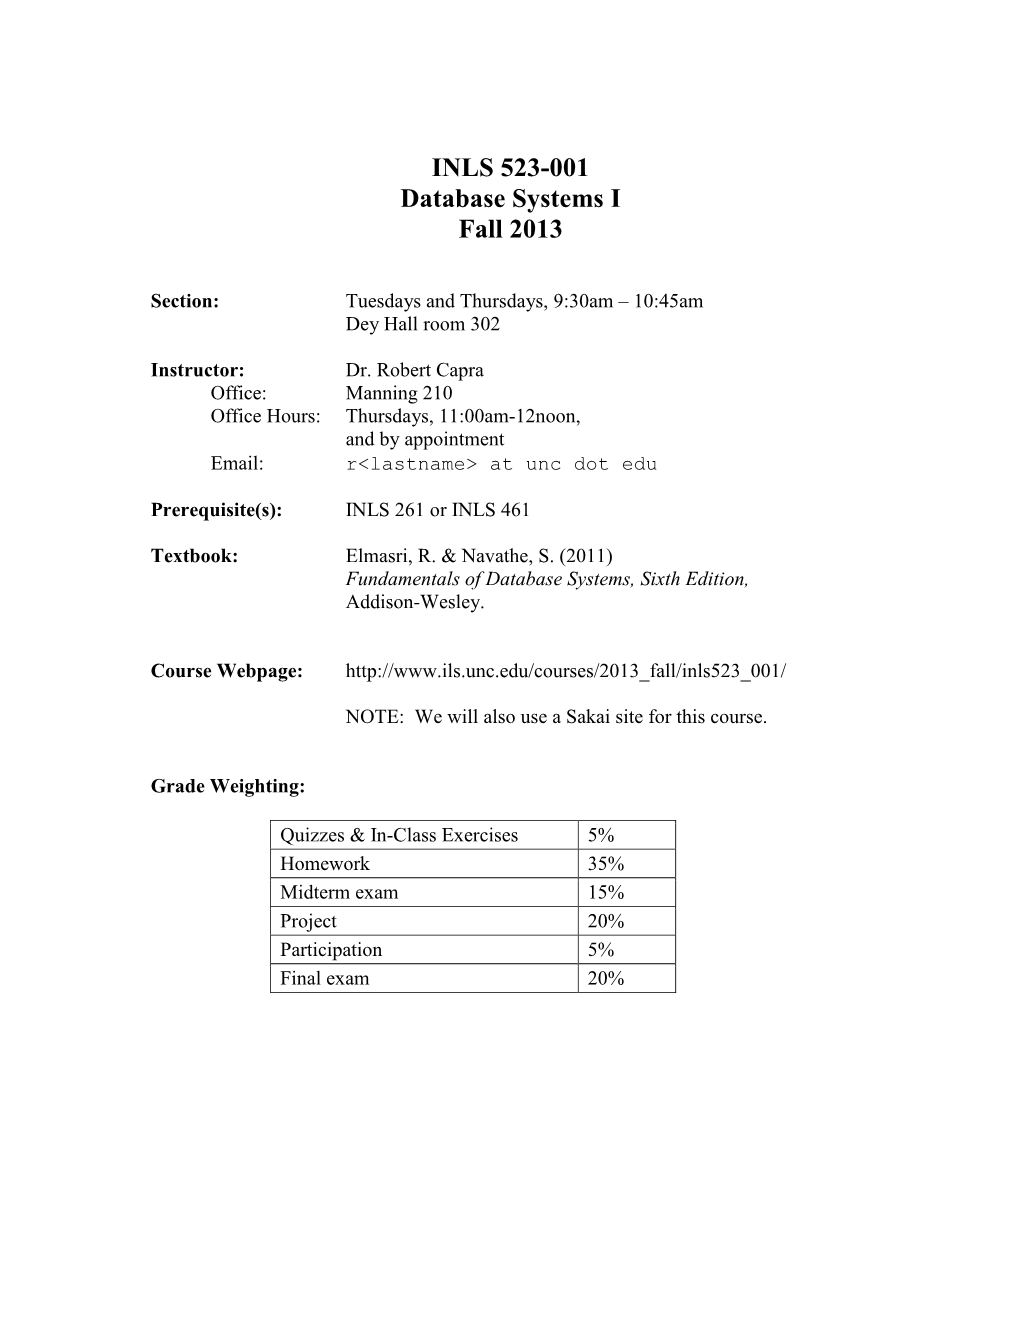 INLS 523-001 Database Systems I Fall 2013